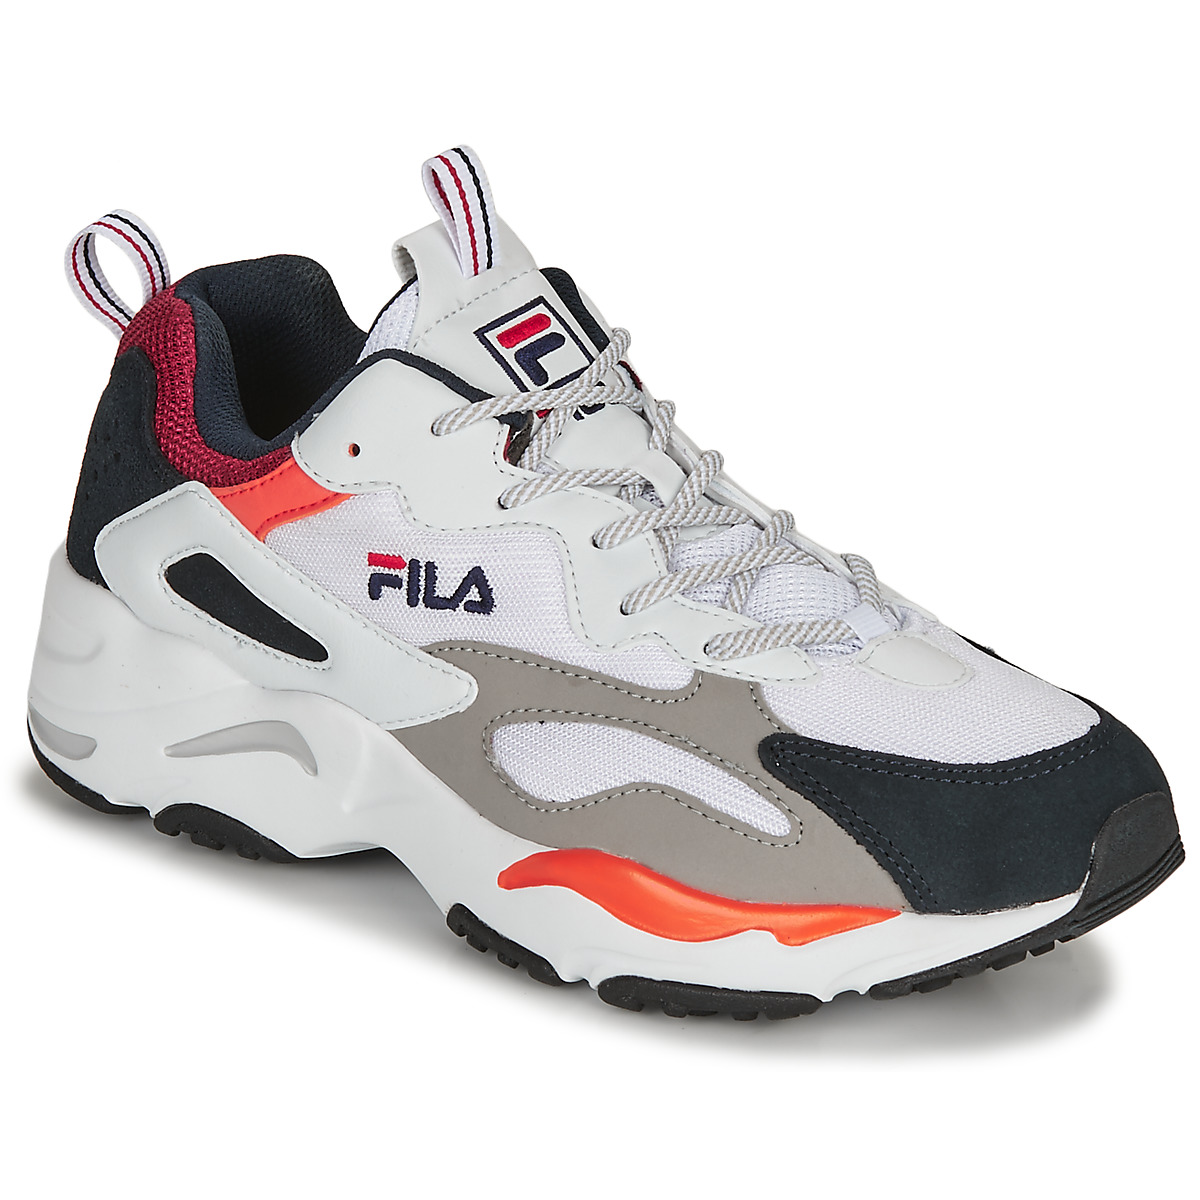 Fila RAY TRACER Blanc / Bleu - Chaussures Baskets basses Homme 99,99 €